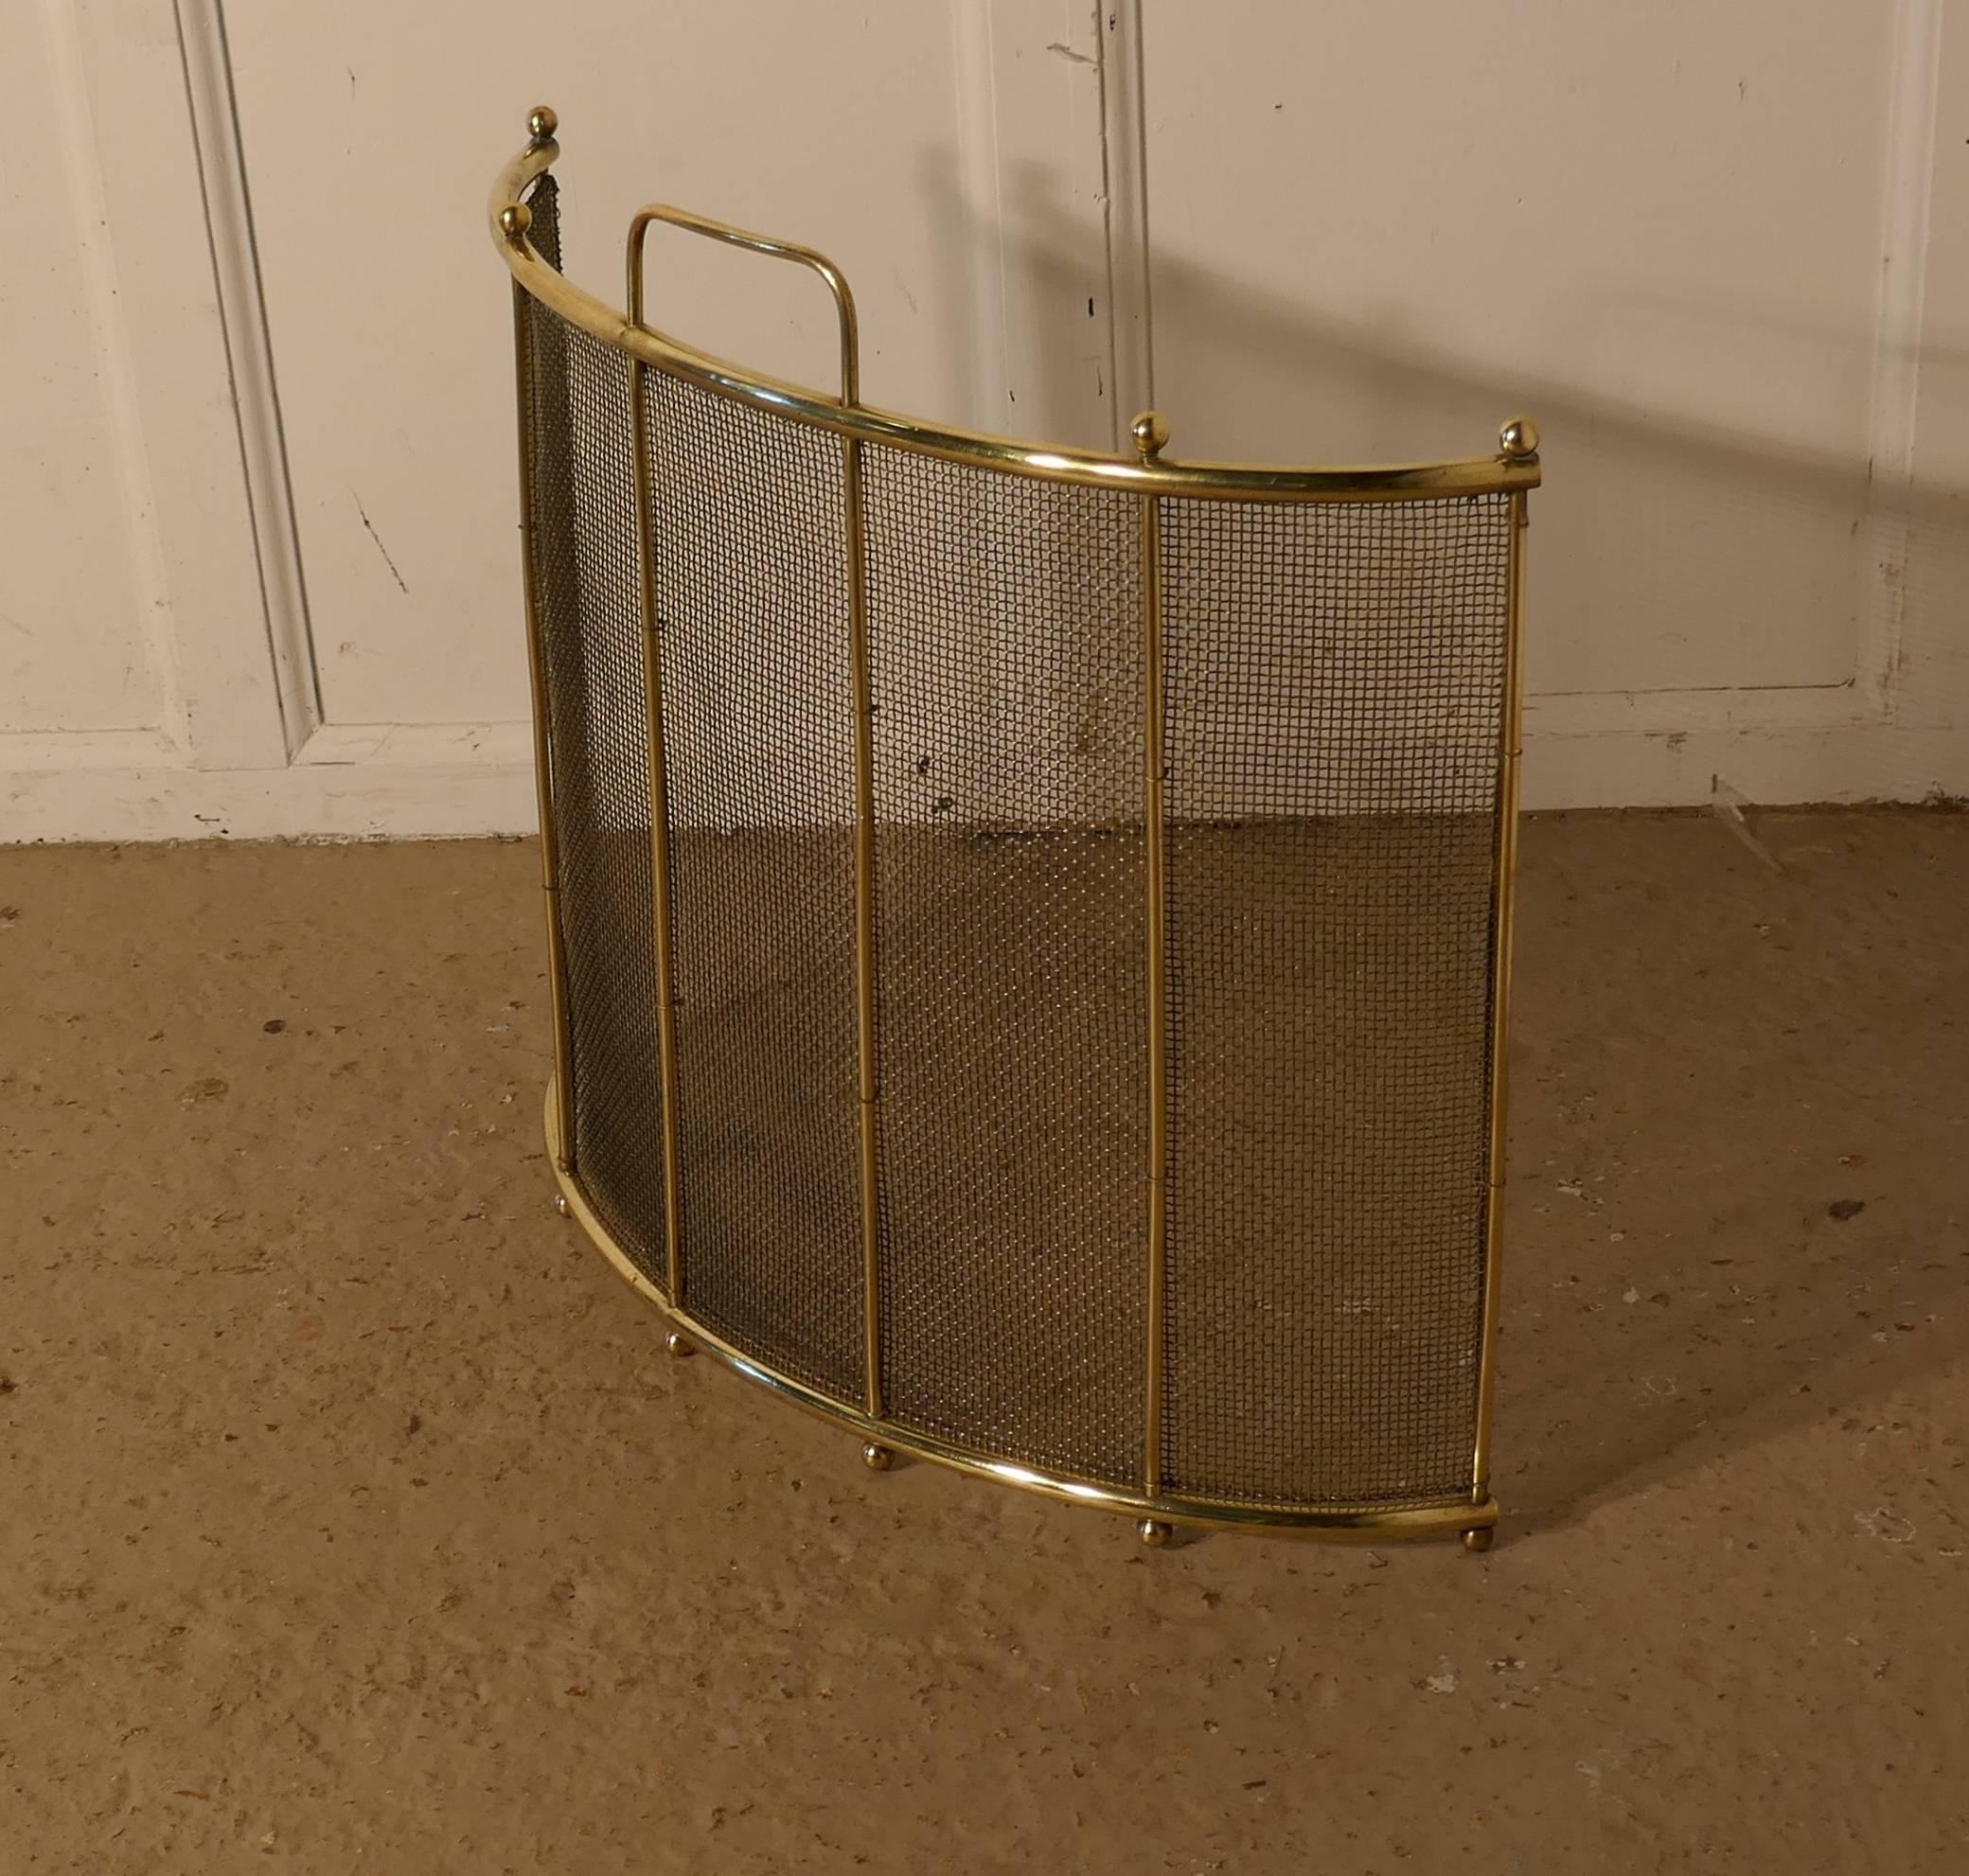 CLEARANCE 50% OFF Victorian Style Fire Screen Fireguard with Spark Mesh 